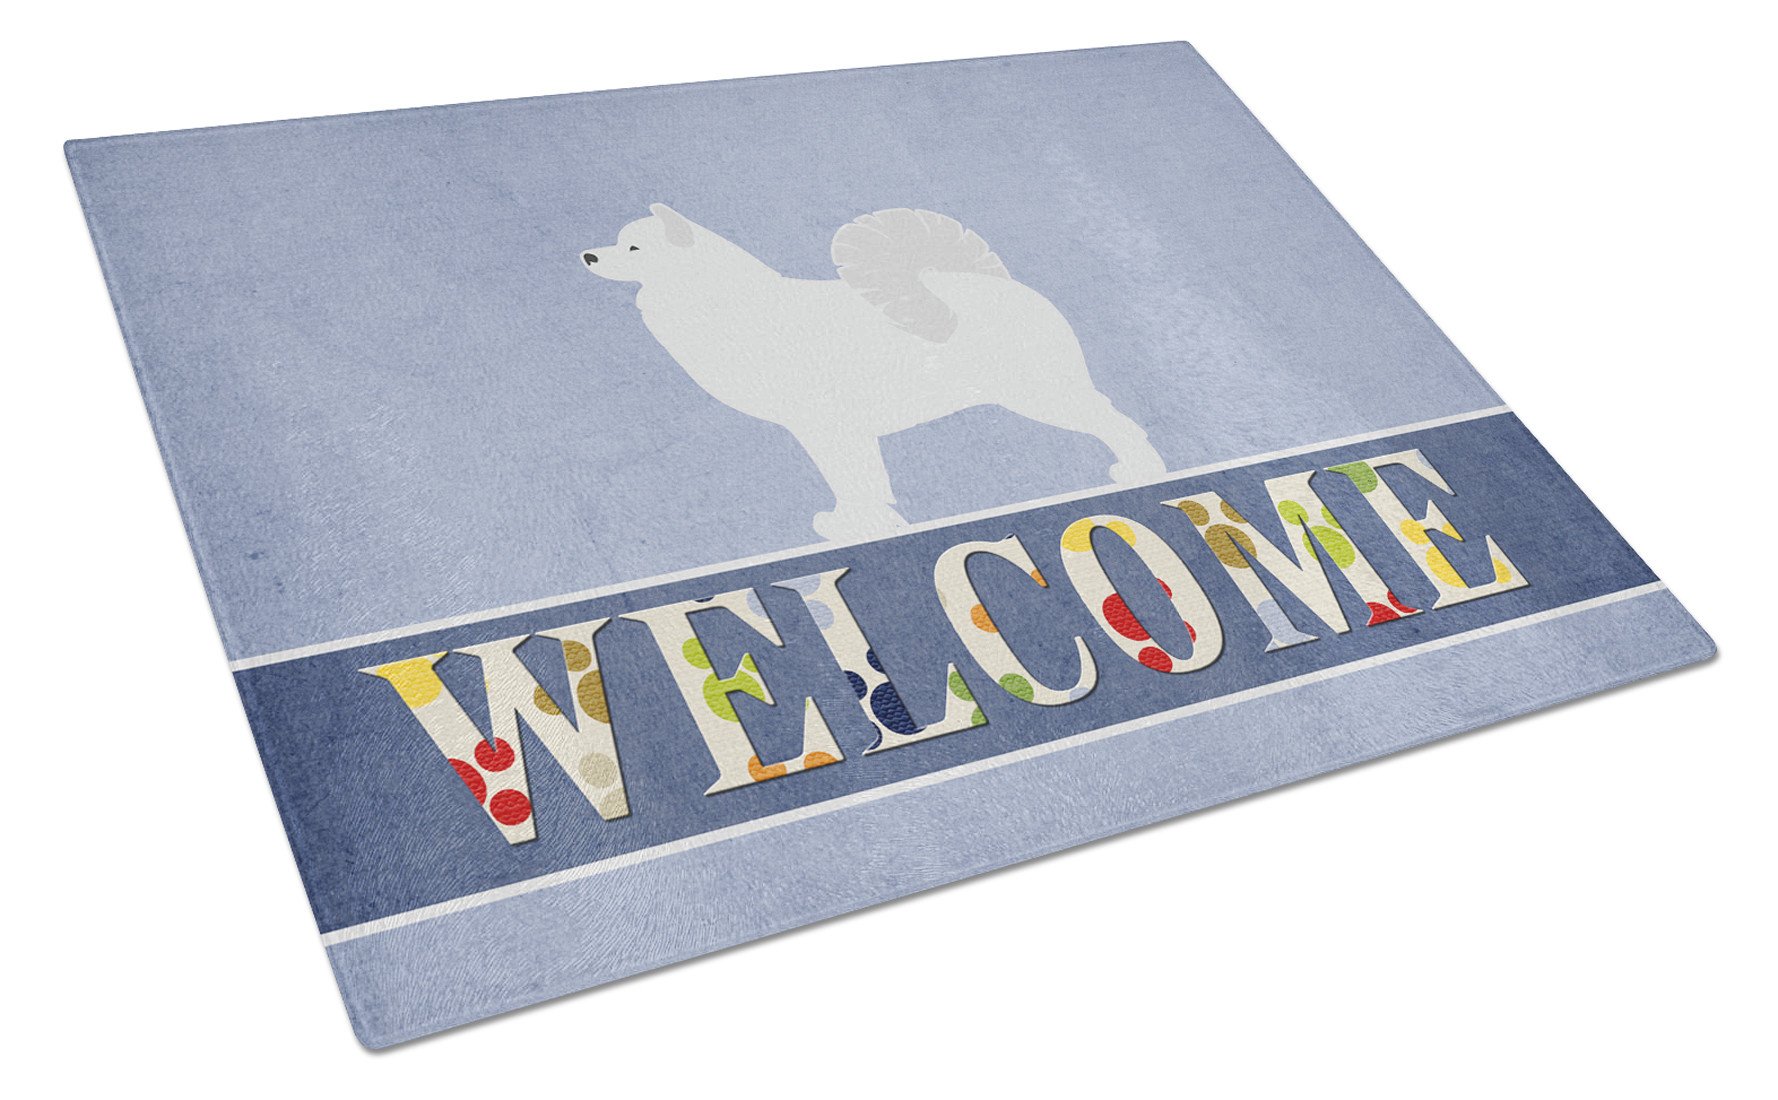 Samoyed Welcome Glass Cutting Board Large BB5563LCB by Caroline's Treasures